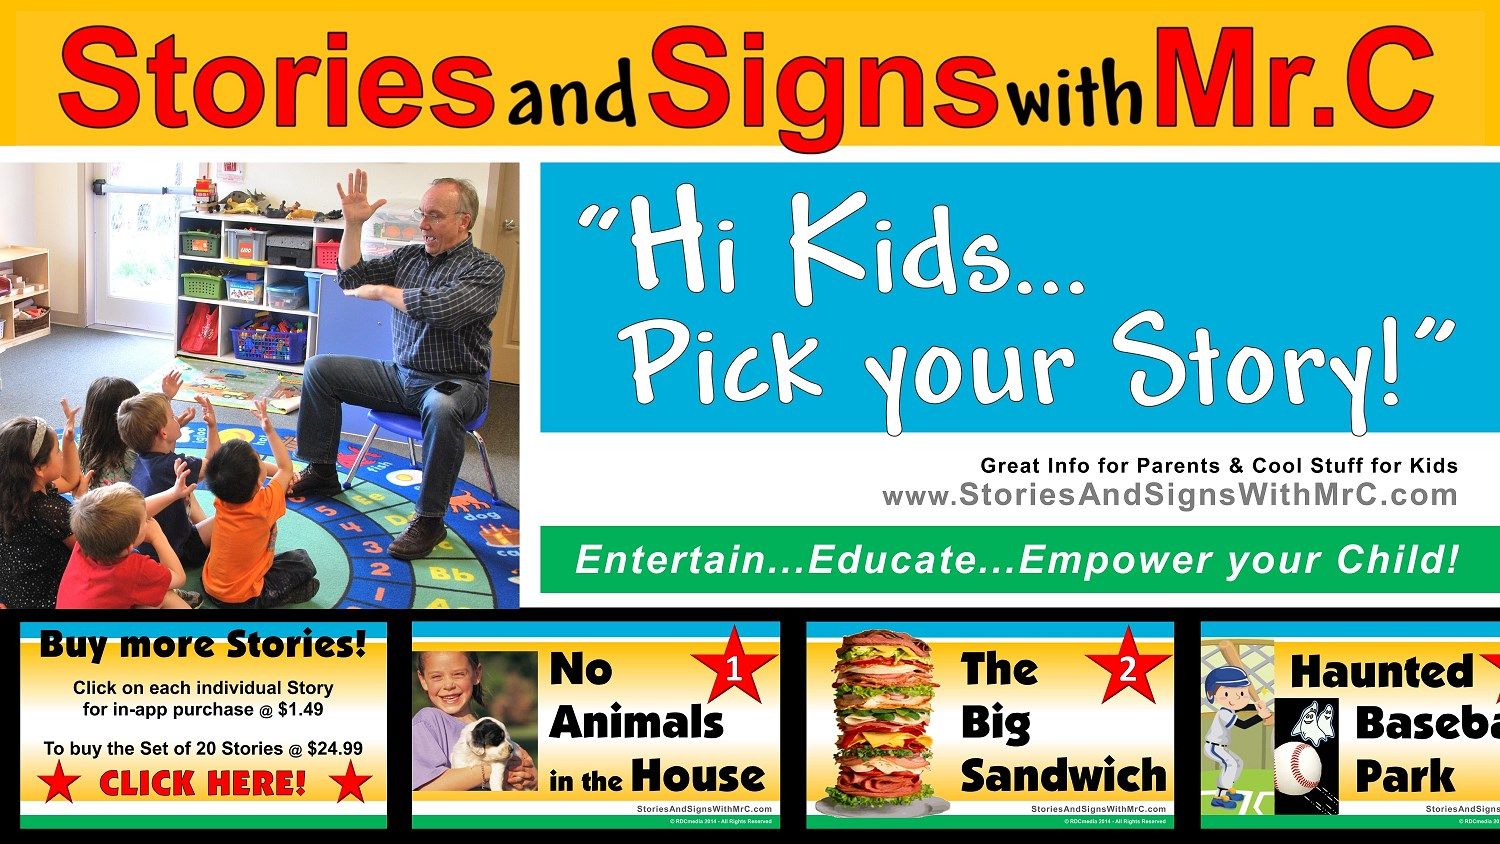 Mr. C will entertain, engage, educate & empower your child with his outrageous Stories and ASL Signs!